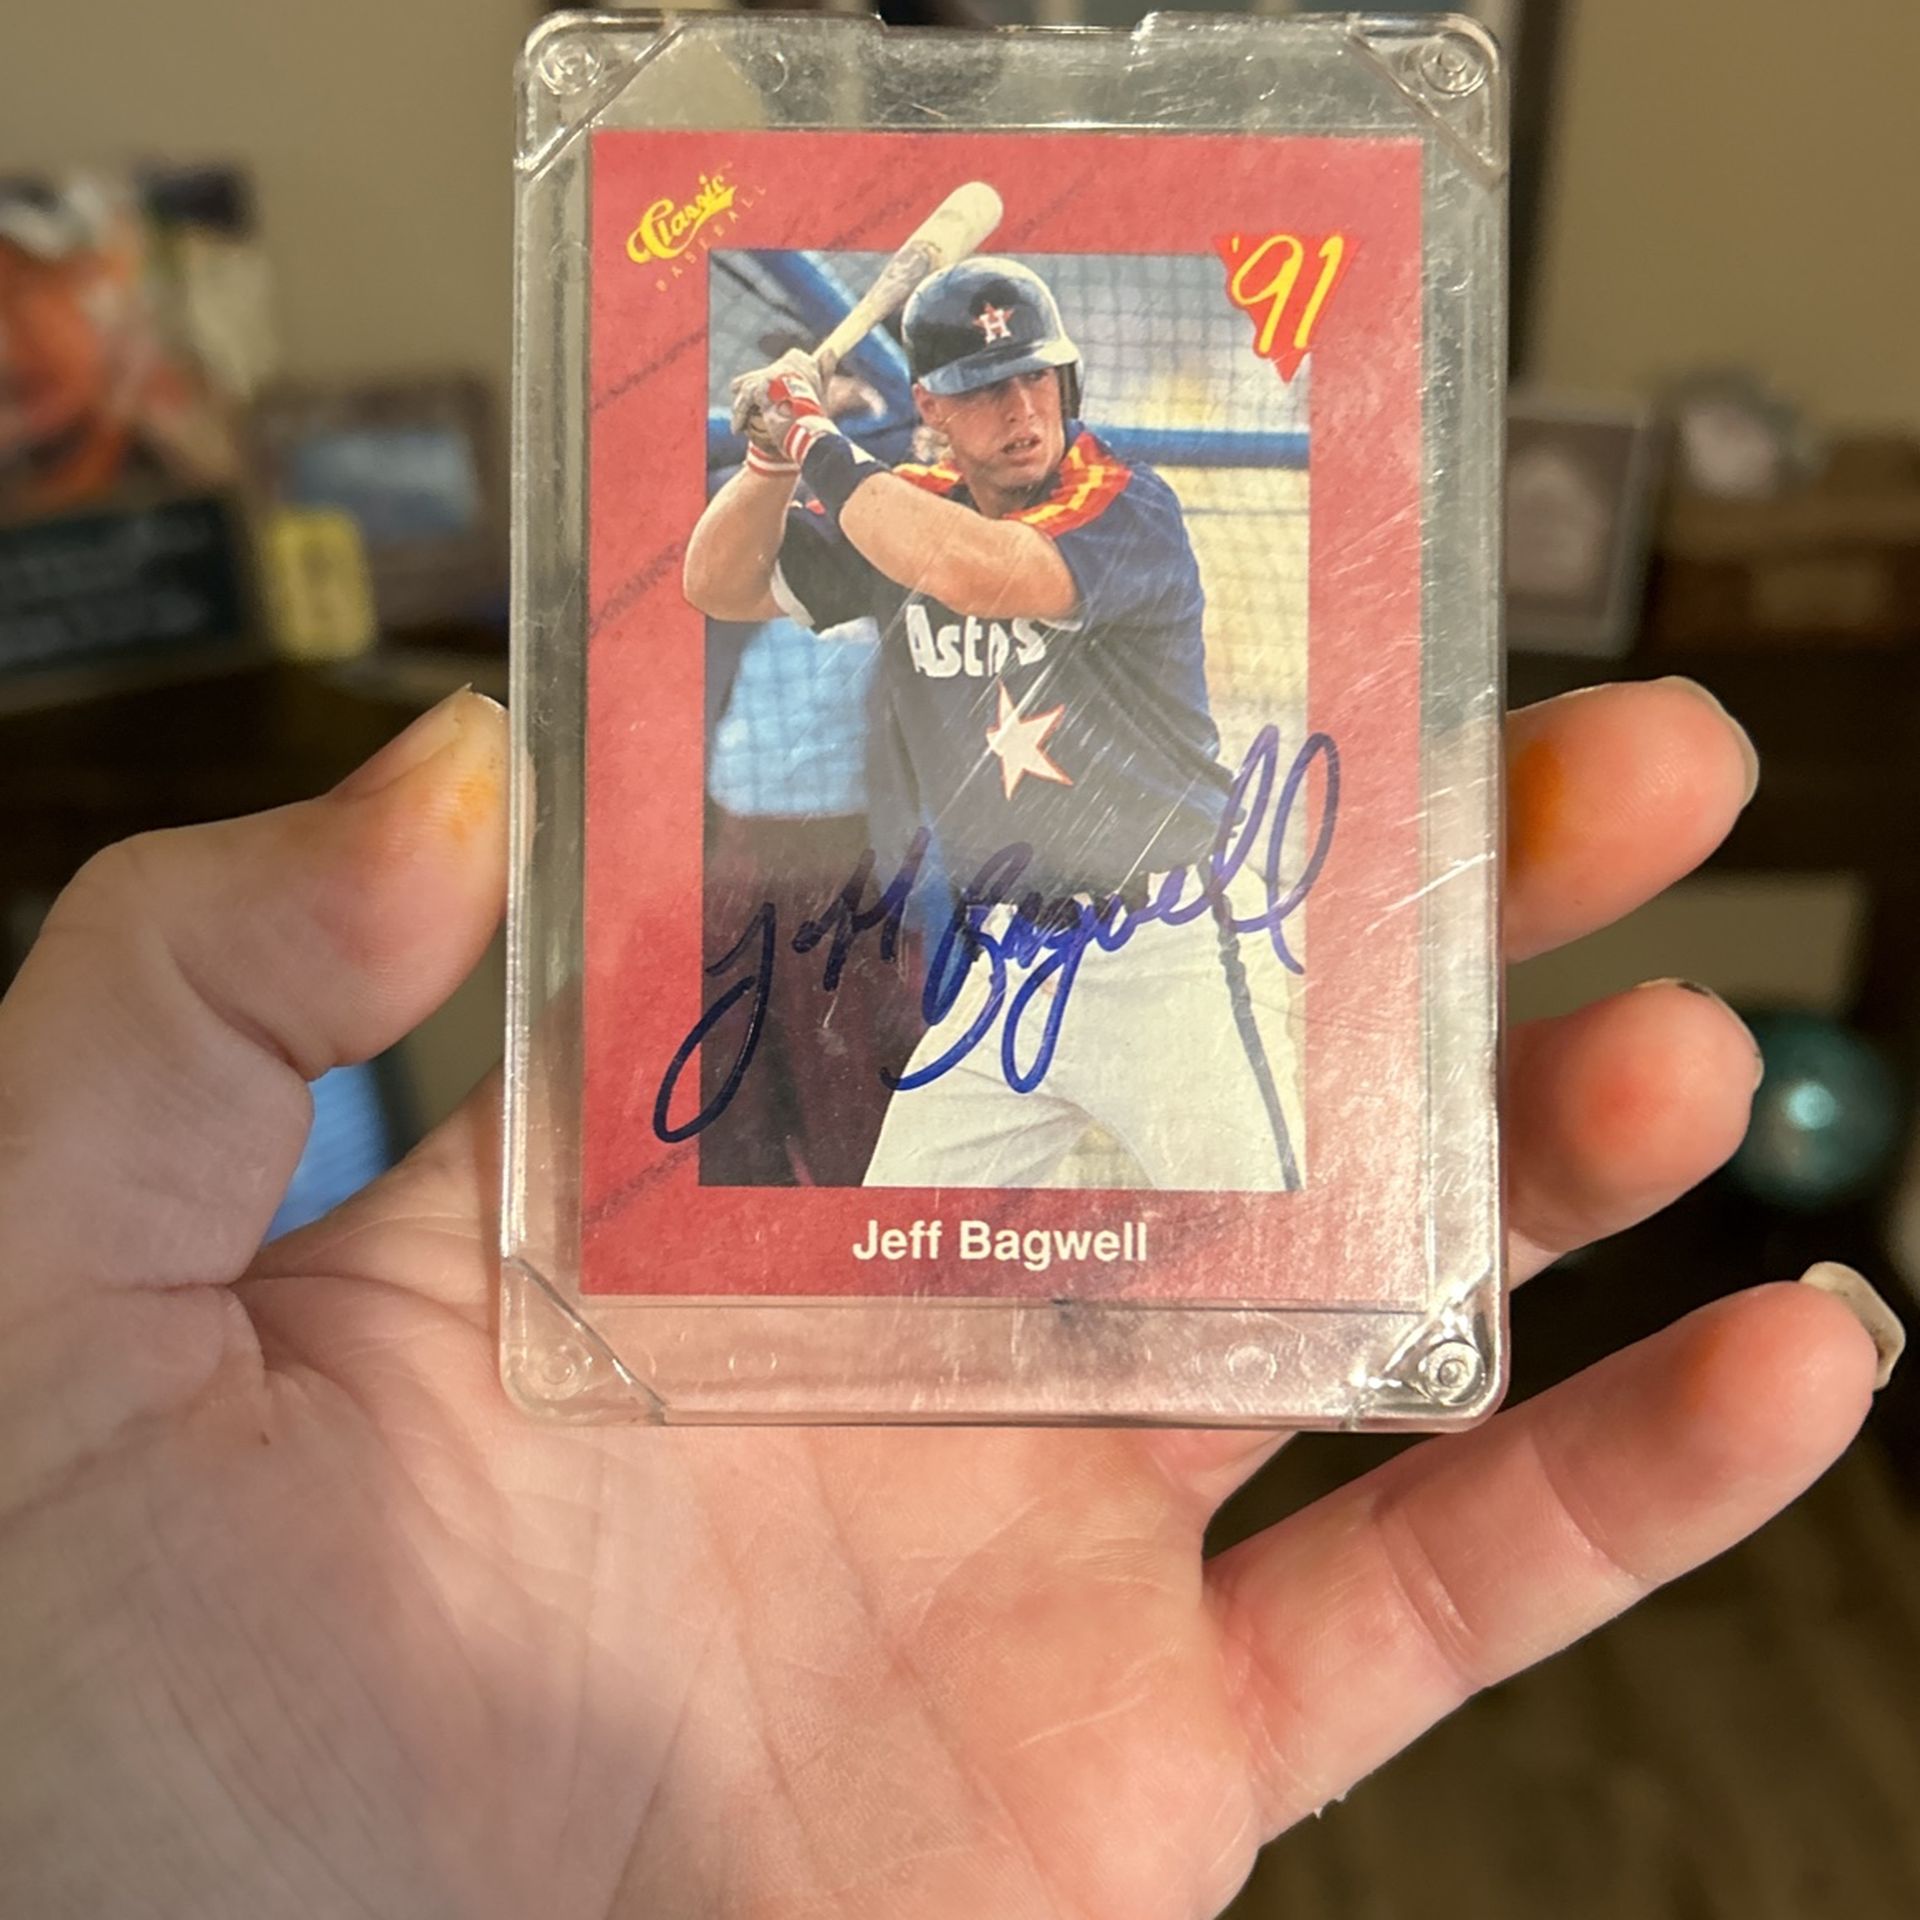 Classic 1991 Baseball Card Autographed By Jeff Bagwell